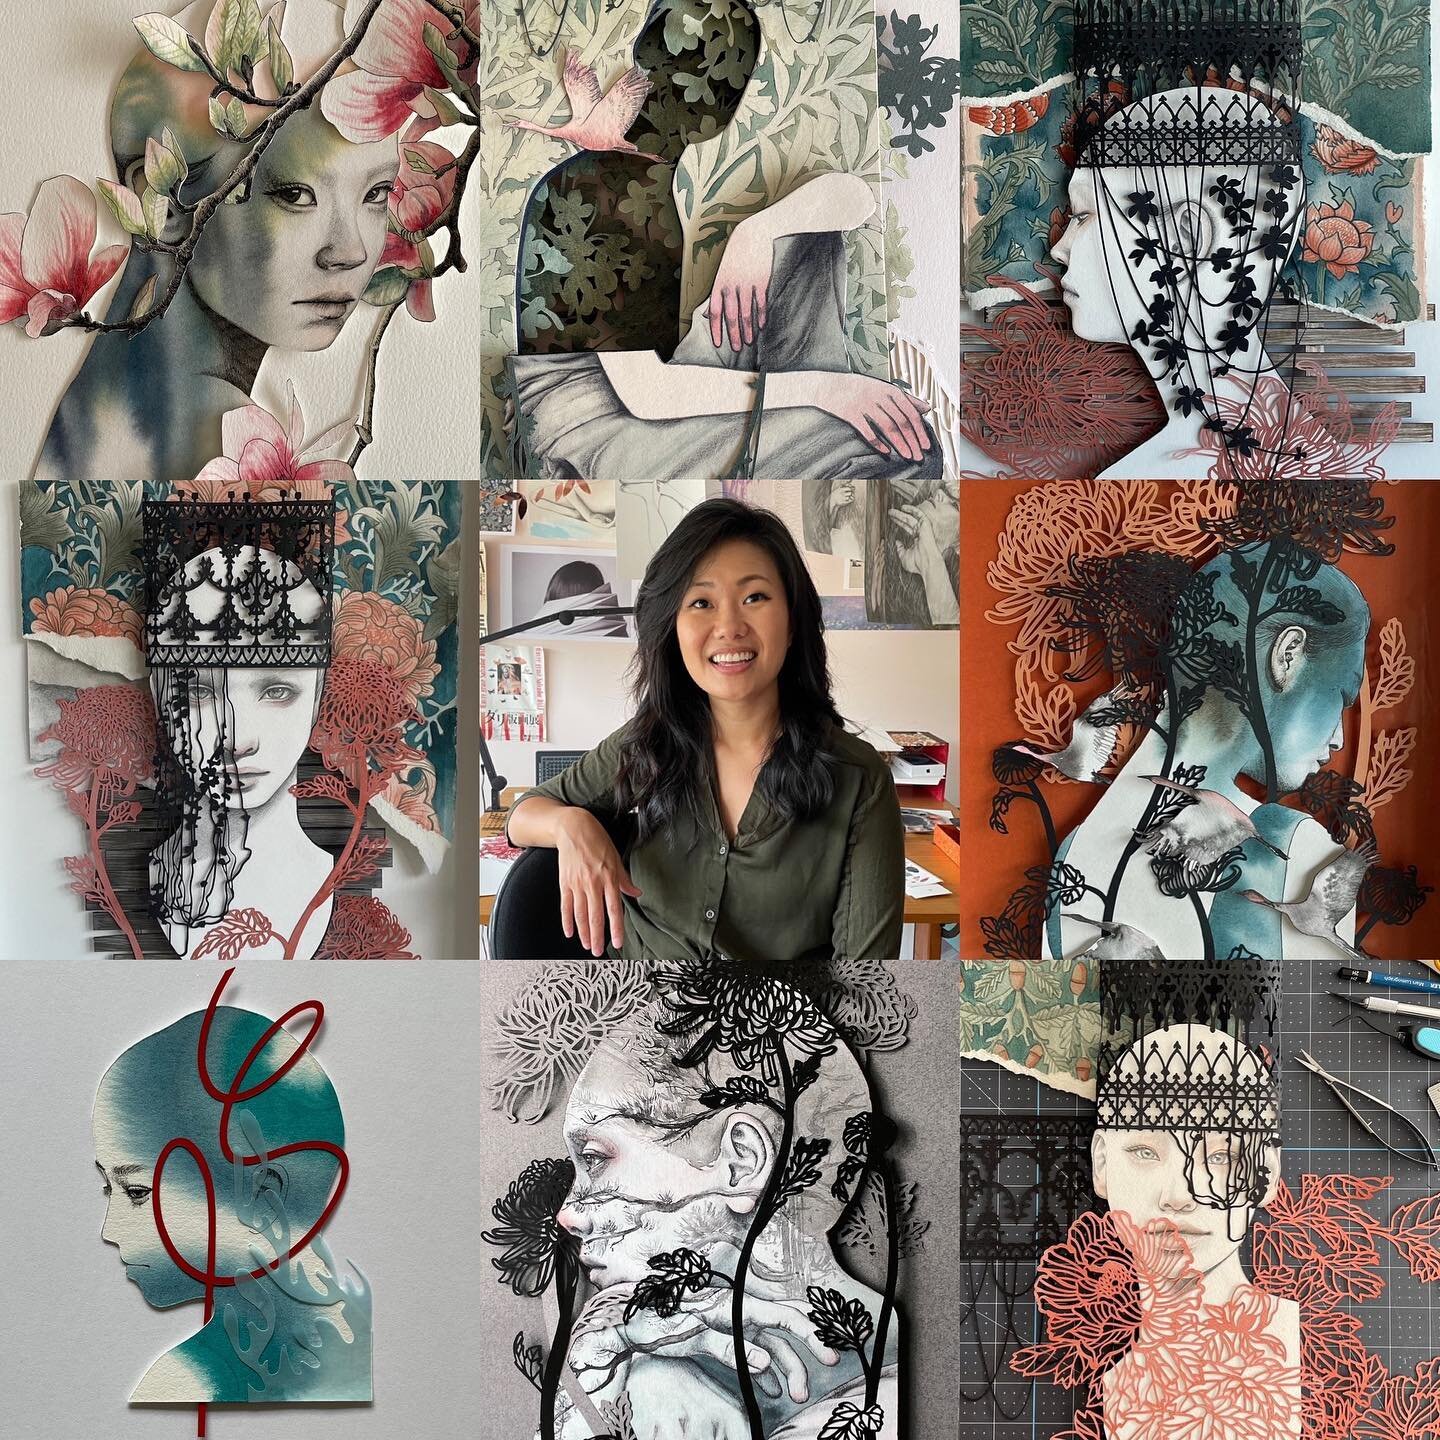 art versus artist 2022 edition! 

December is usually chaos before Christmas but I&rsquo;m looking forward to the holidays and a new semester. Wishing everyone a very joyous winter season.

#artvsartist #artvsartist2022 #paperart #paperartistcollecti